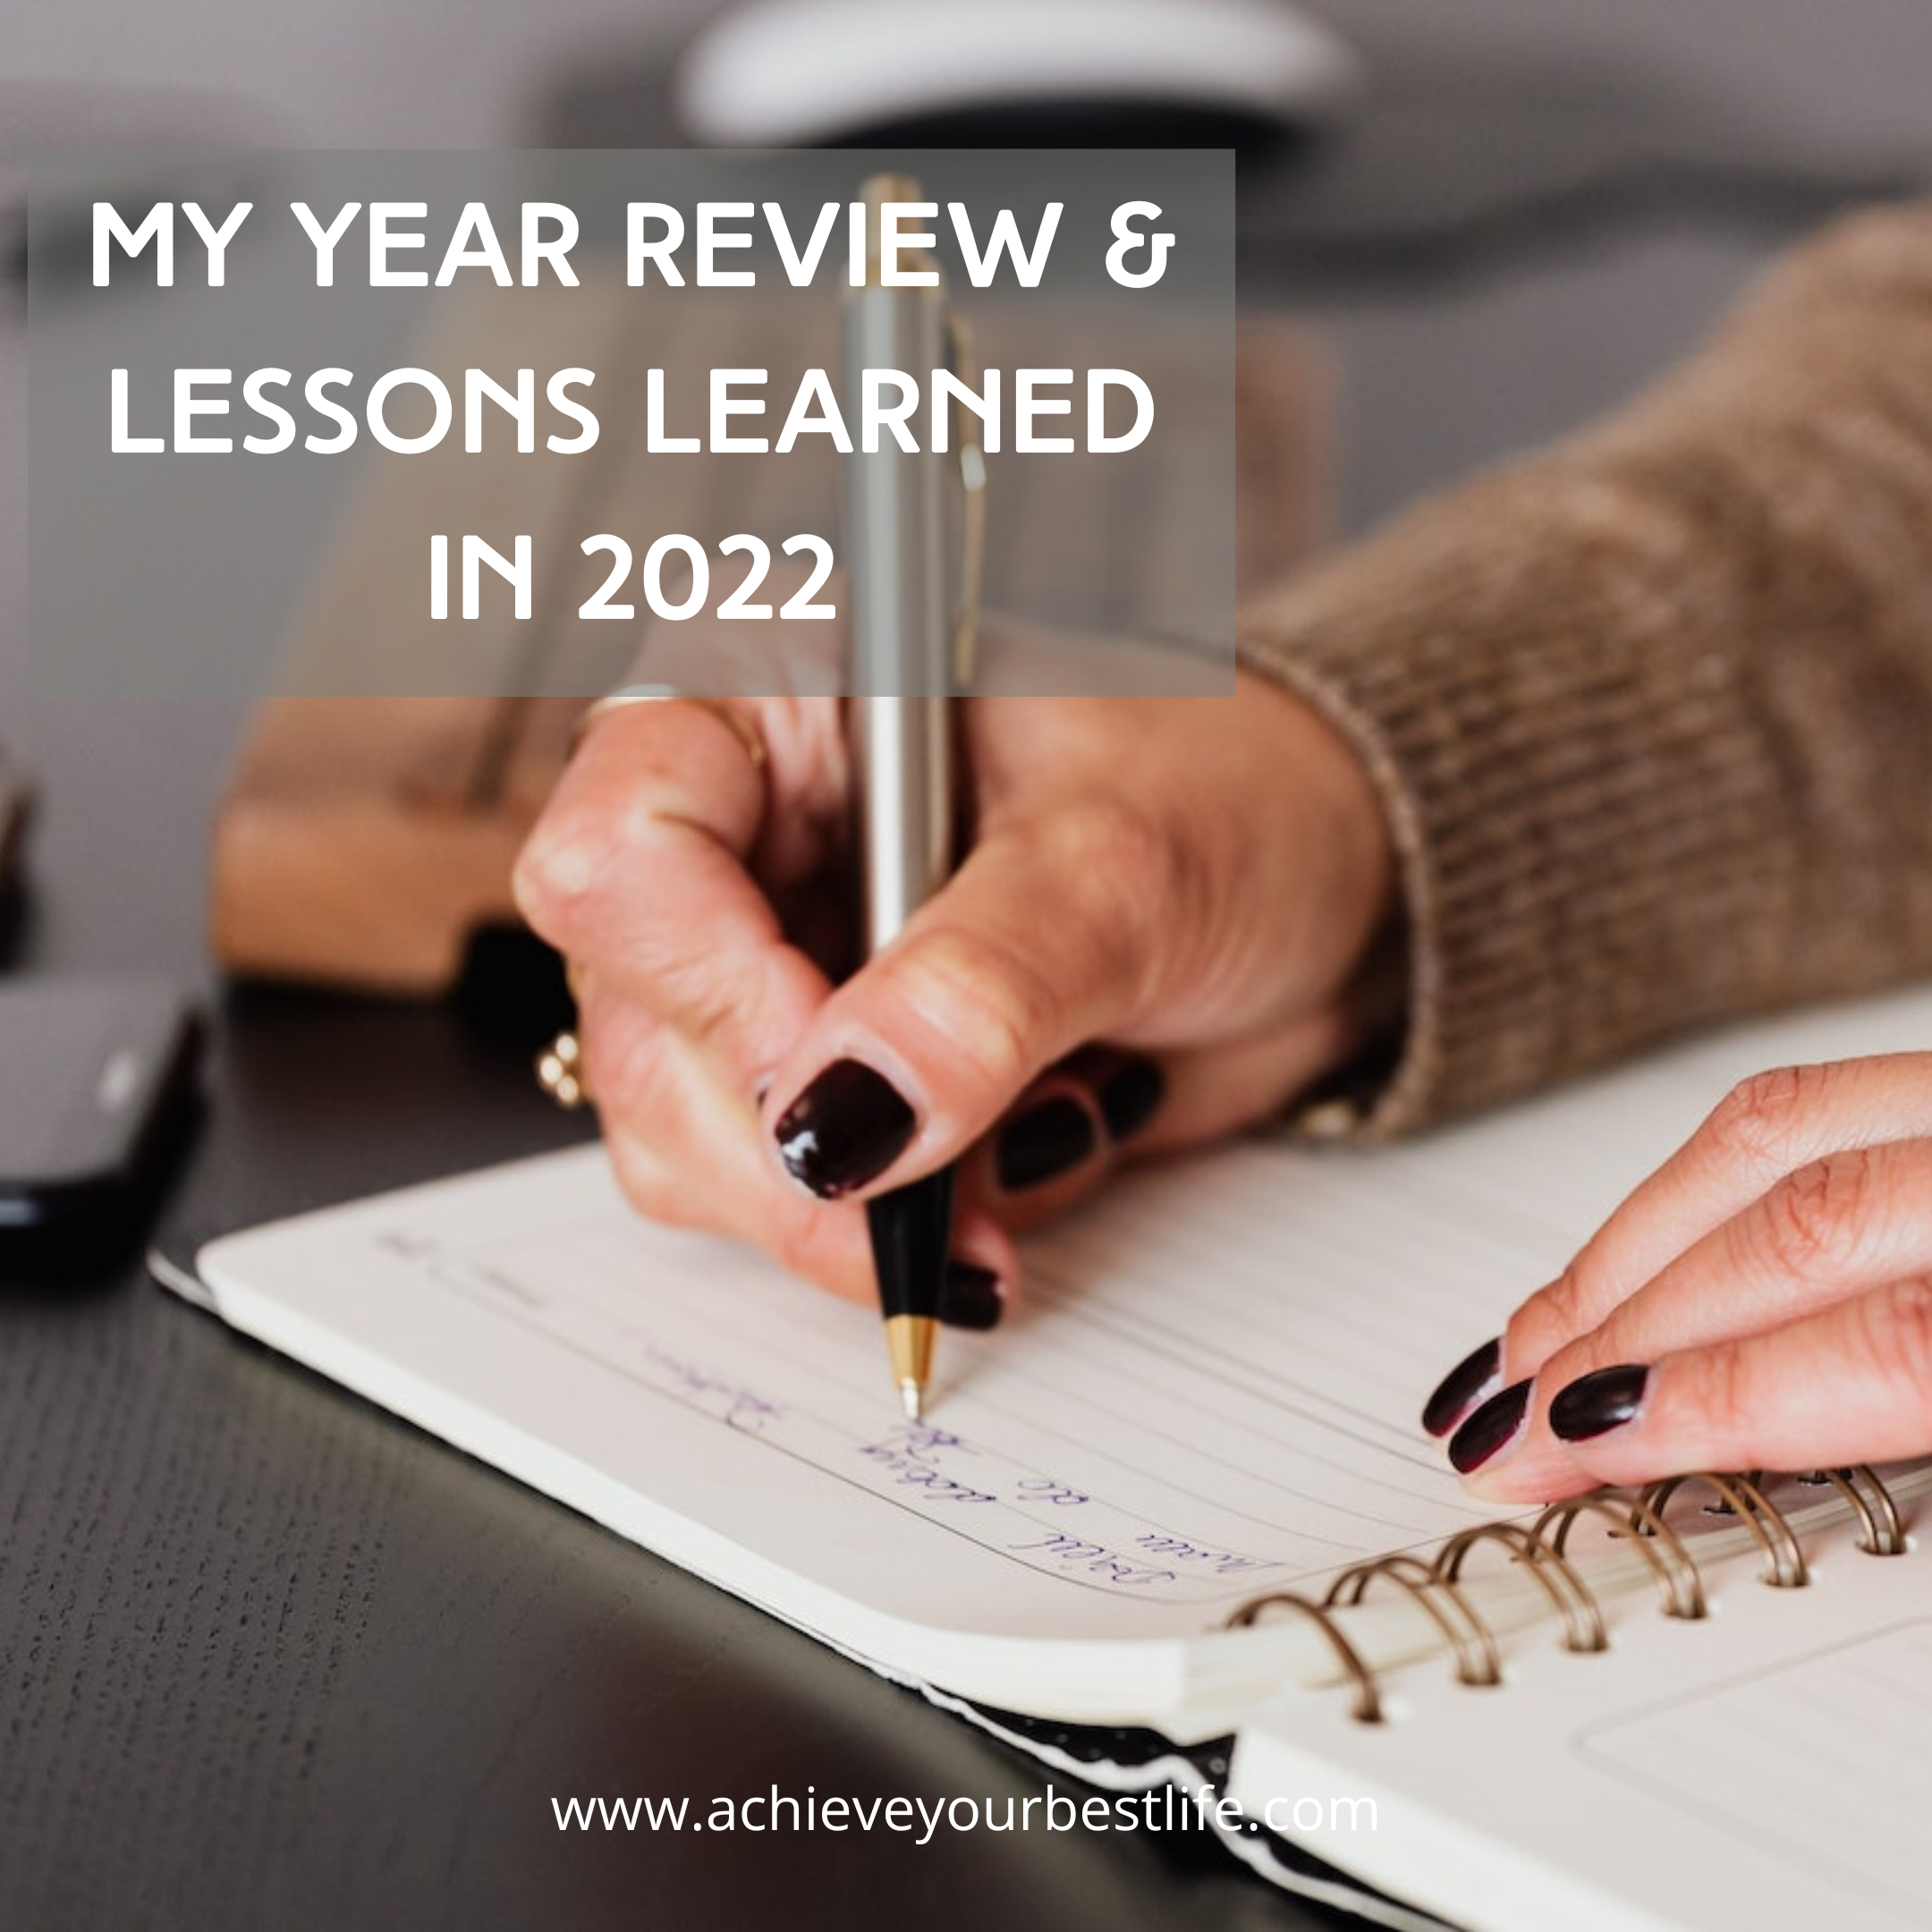 Lessons Learned and Year Review 2022